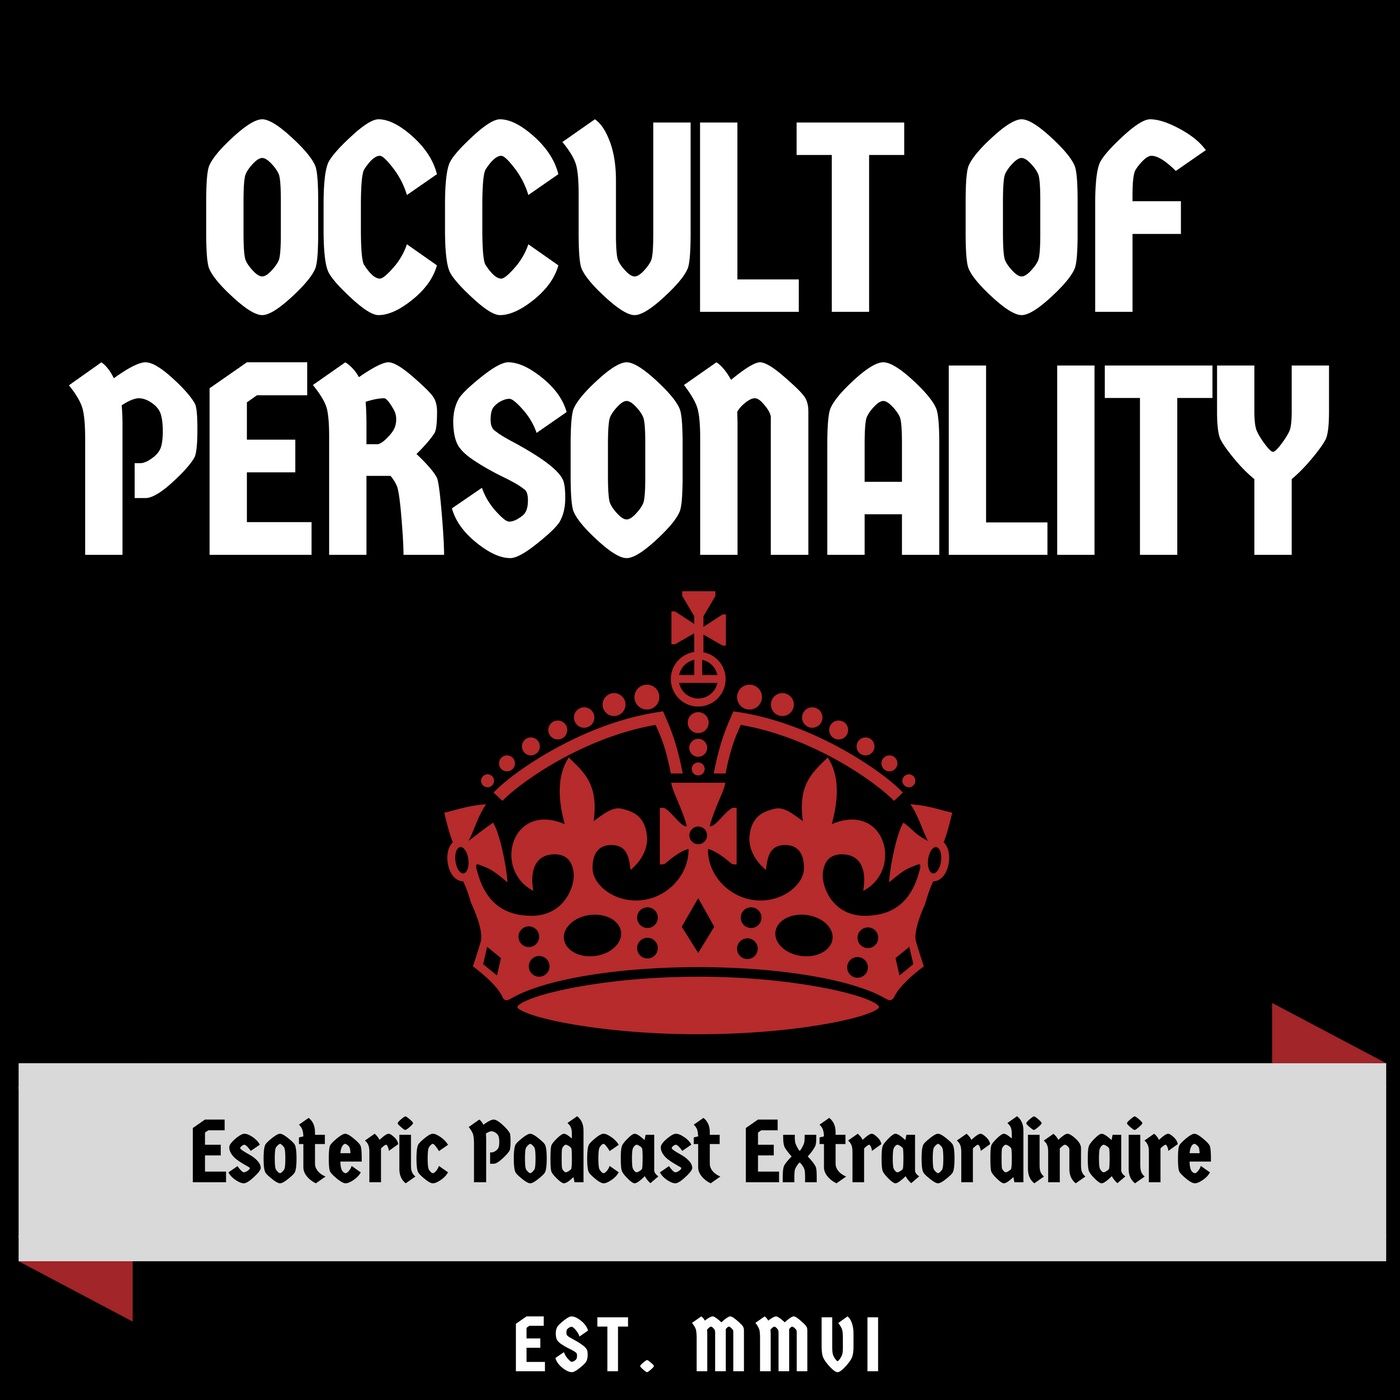 Occult of Personality podcast